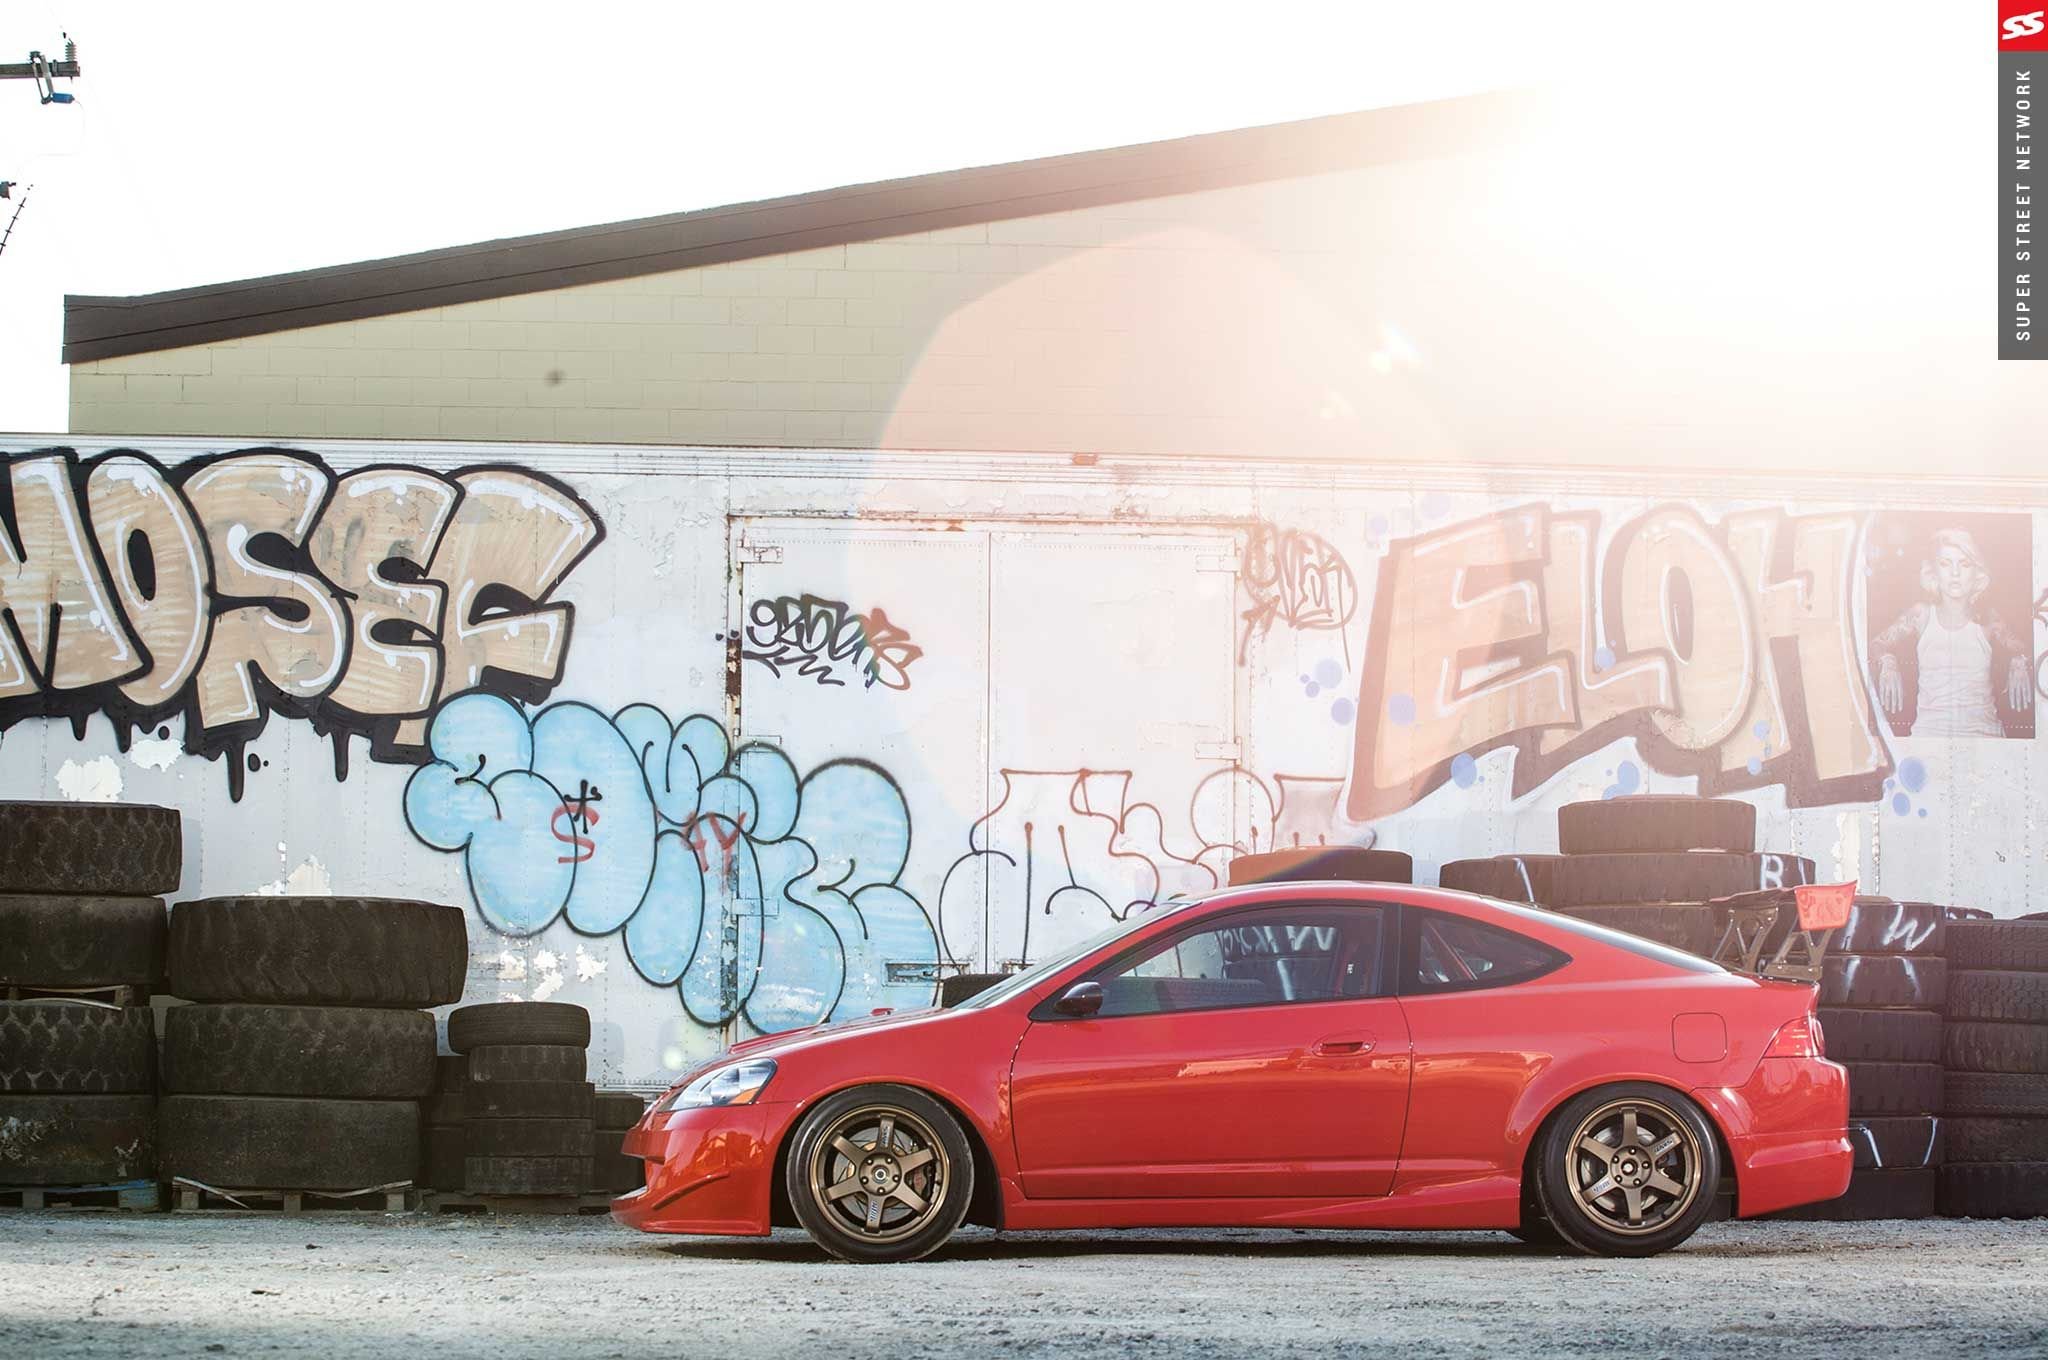 mugen, 2003, Acura, Rsx, Type s, Cars, Coupe, Red, Modified Wallpaper